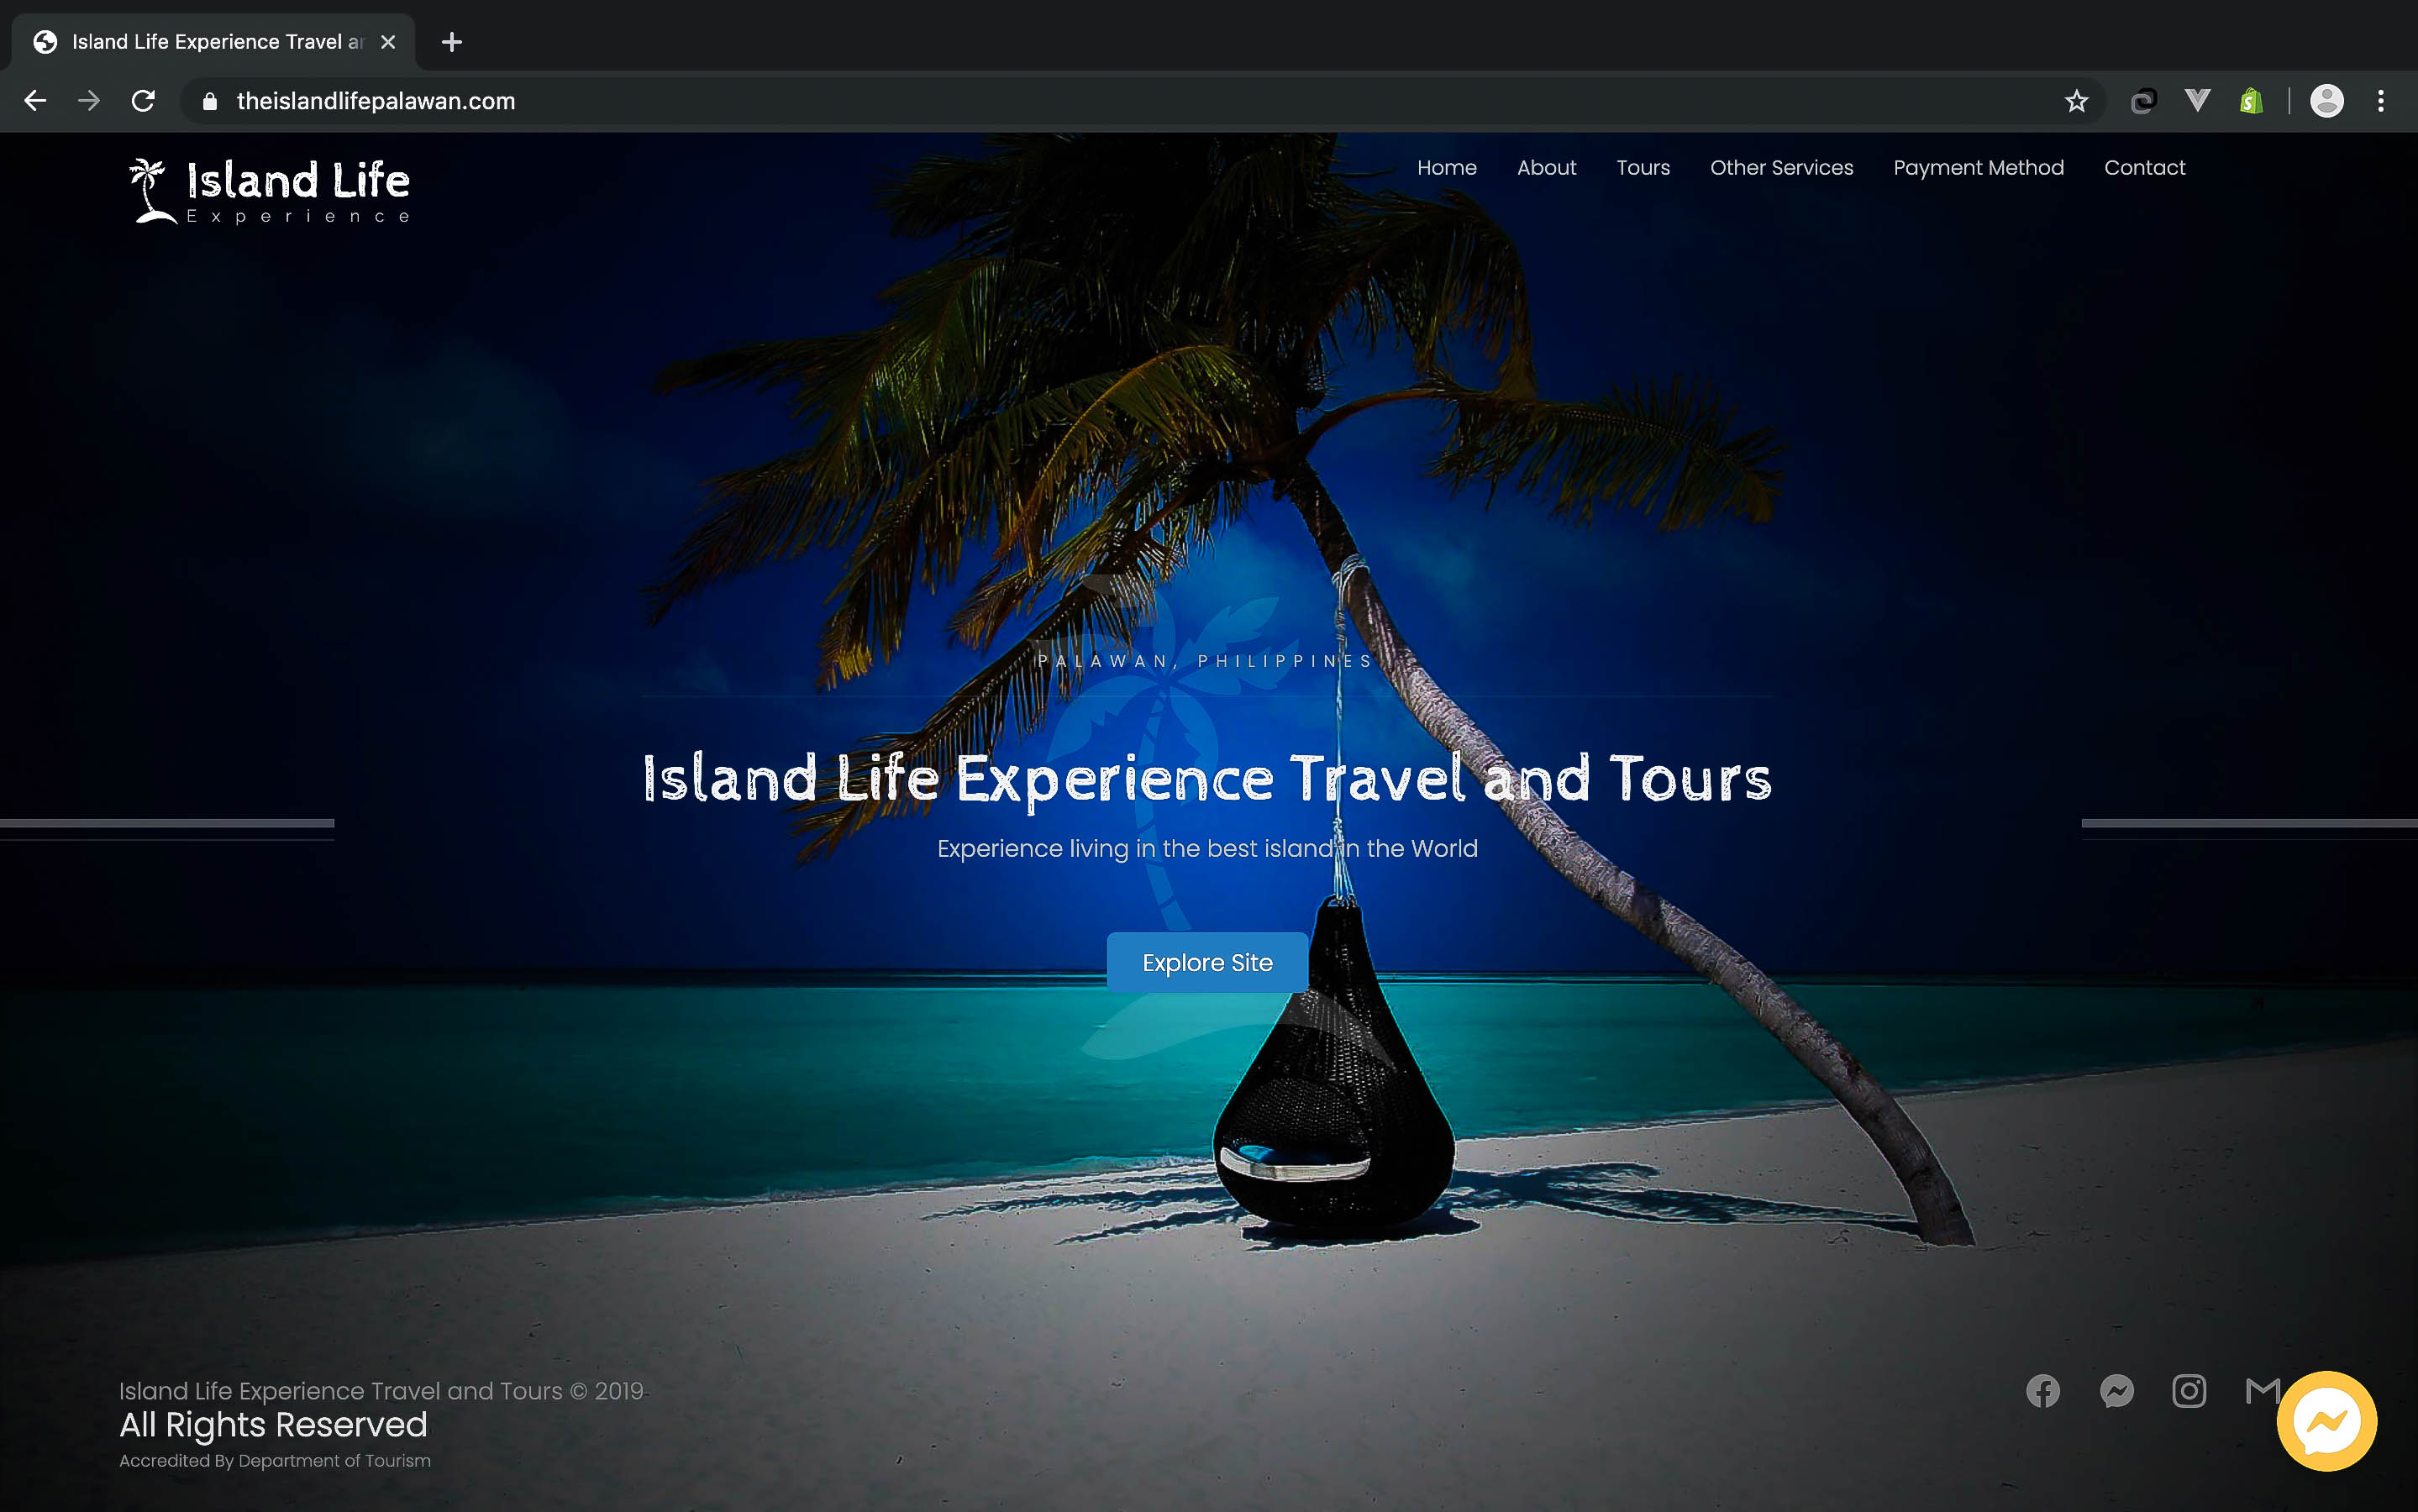 Island Life Experience Travel & Tours